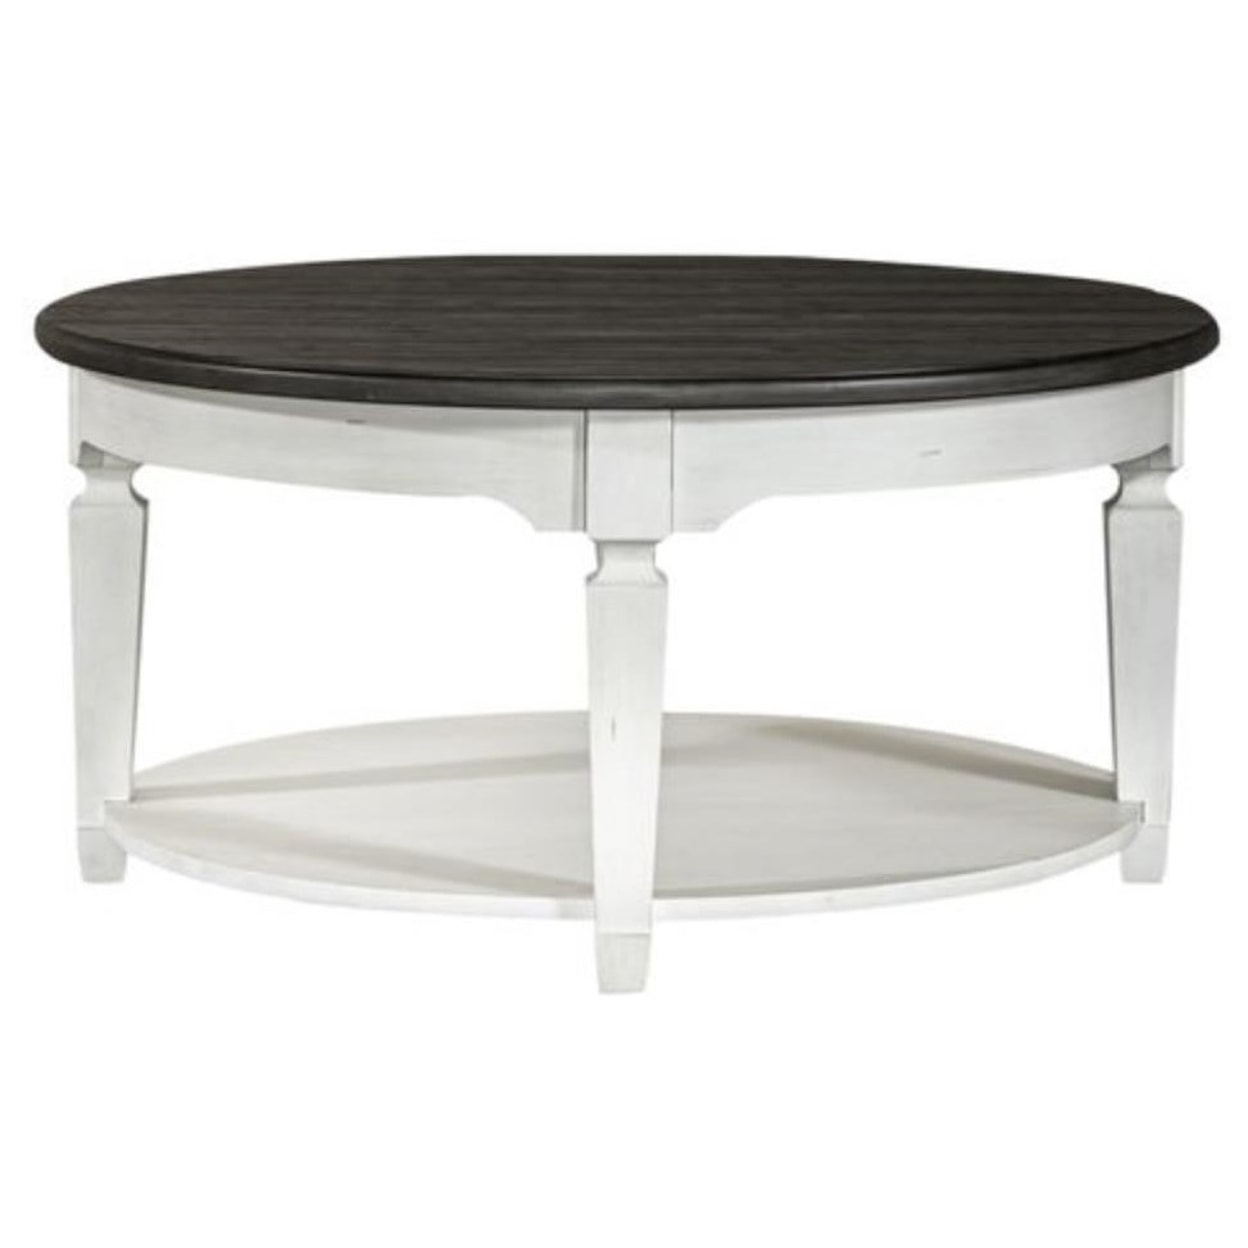 Liberty Furniture Allyson Park Round Cocktail Table